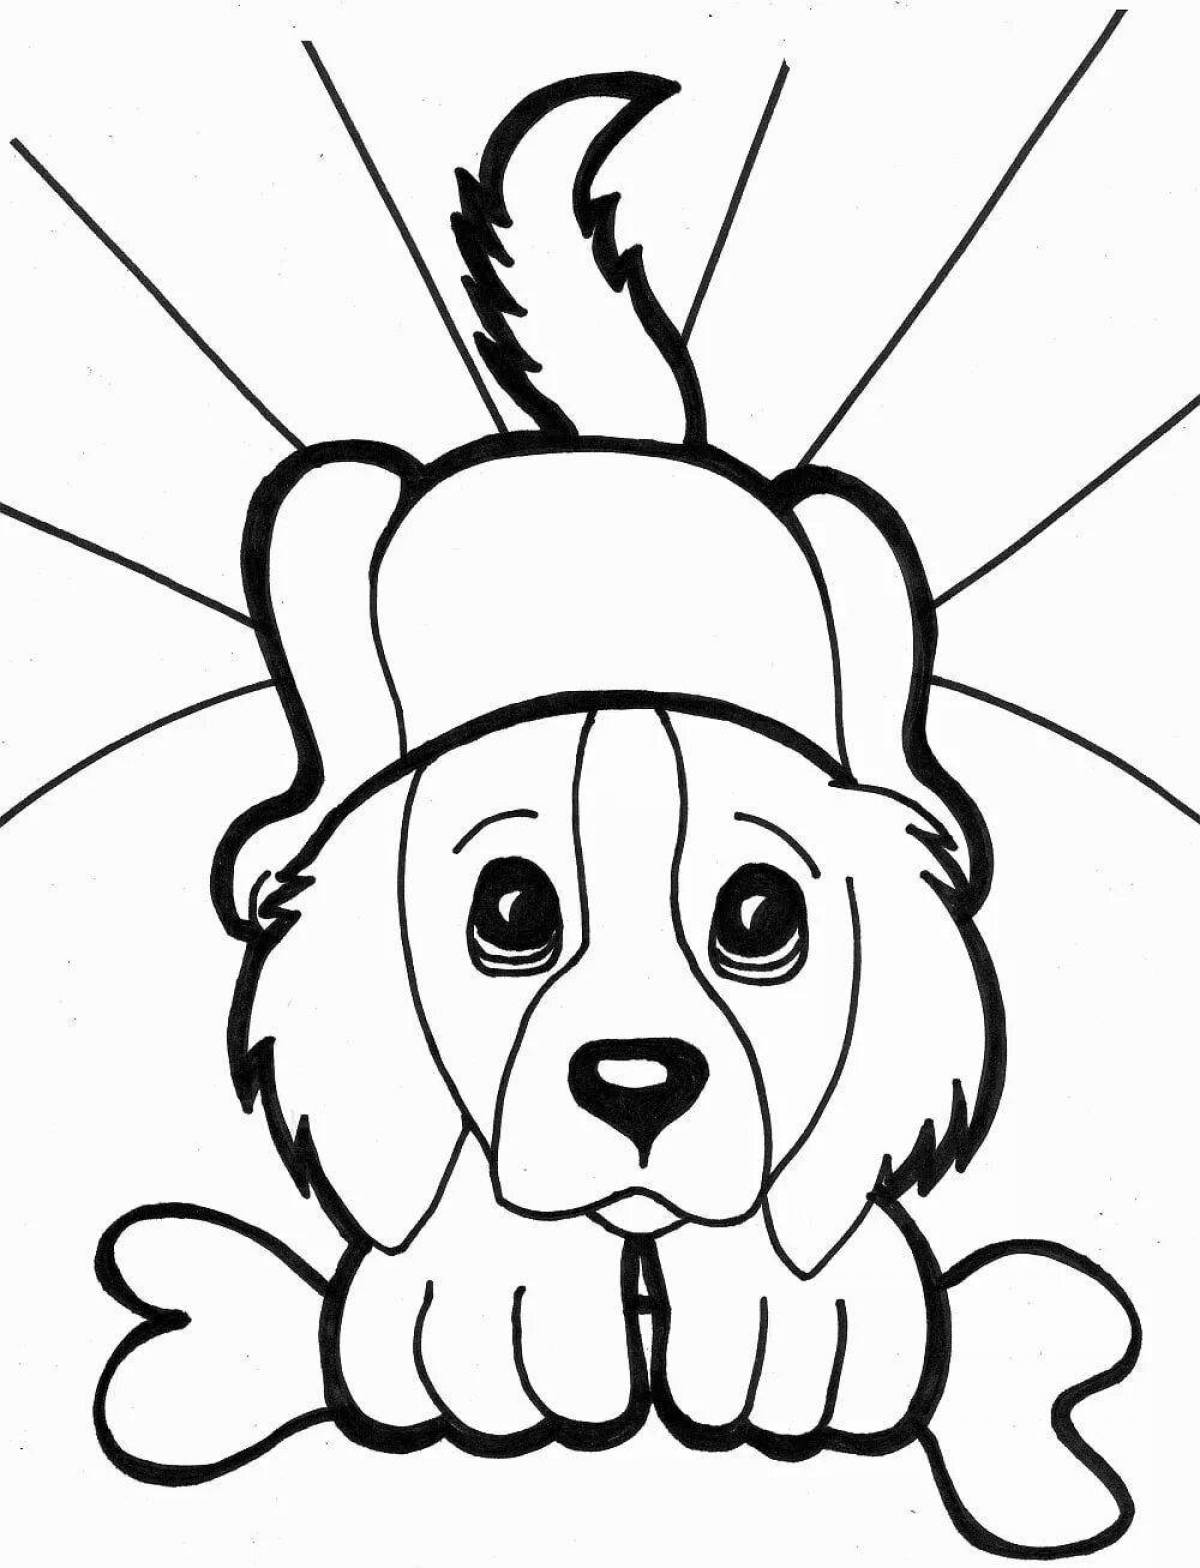 Joyful coloring drawing of a puppy